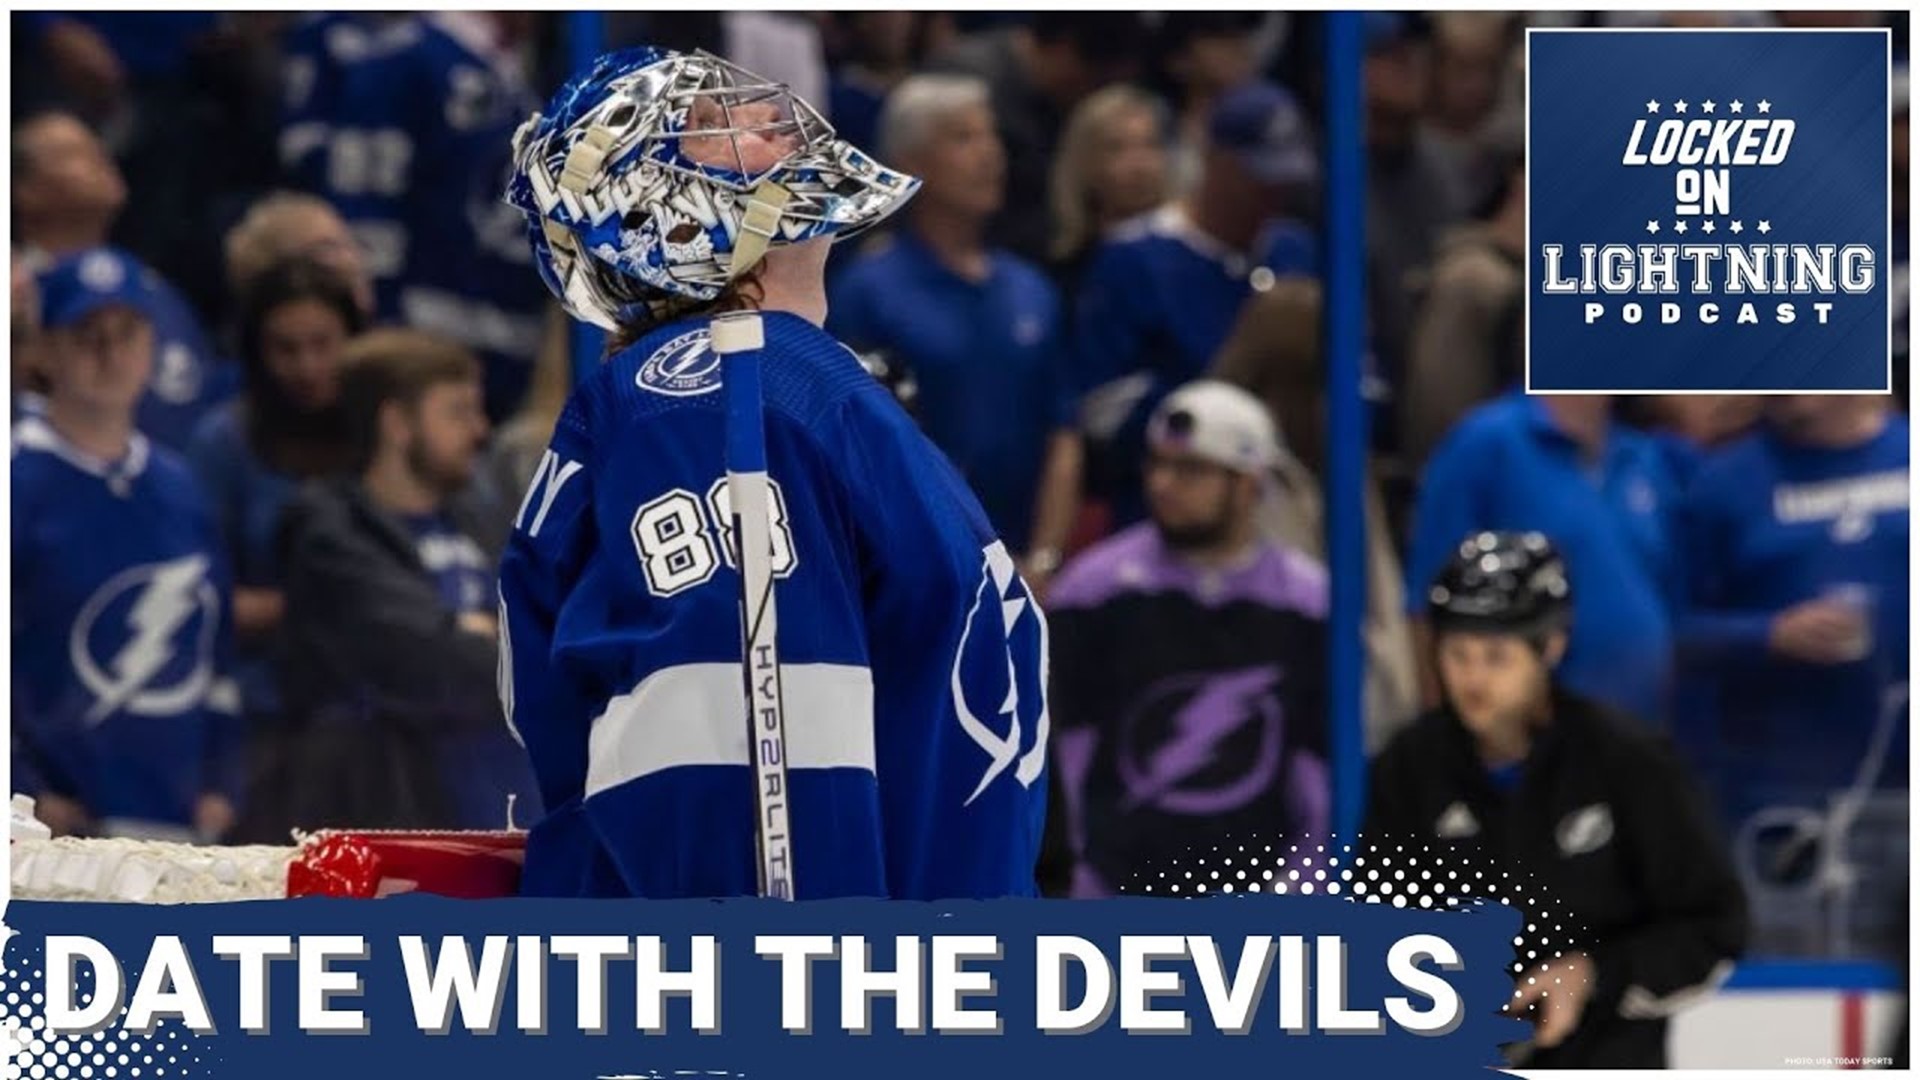 The Lightning start off the first of two matchups in New Jersey tonight. They'll look to their star goaltender Andrei Vasilevskiy to rein in the Devils